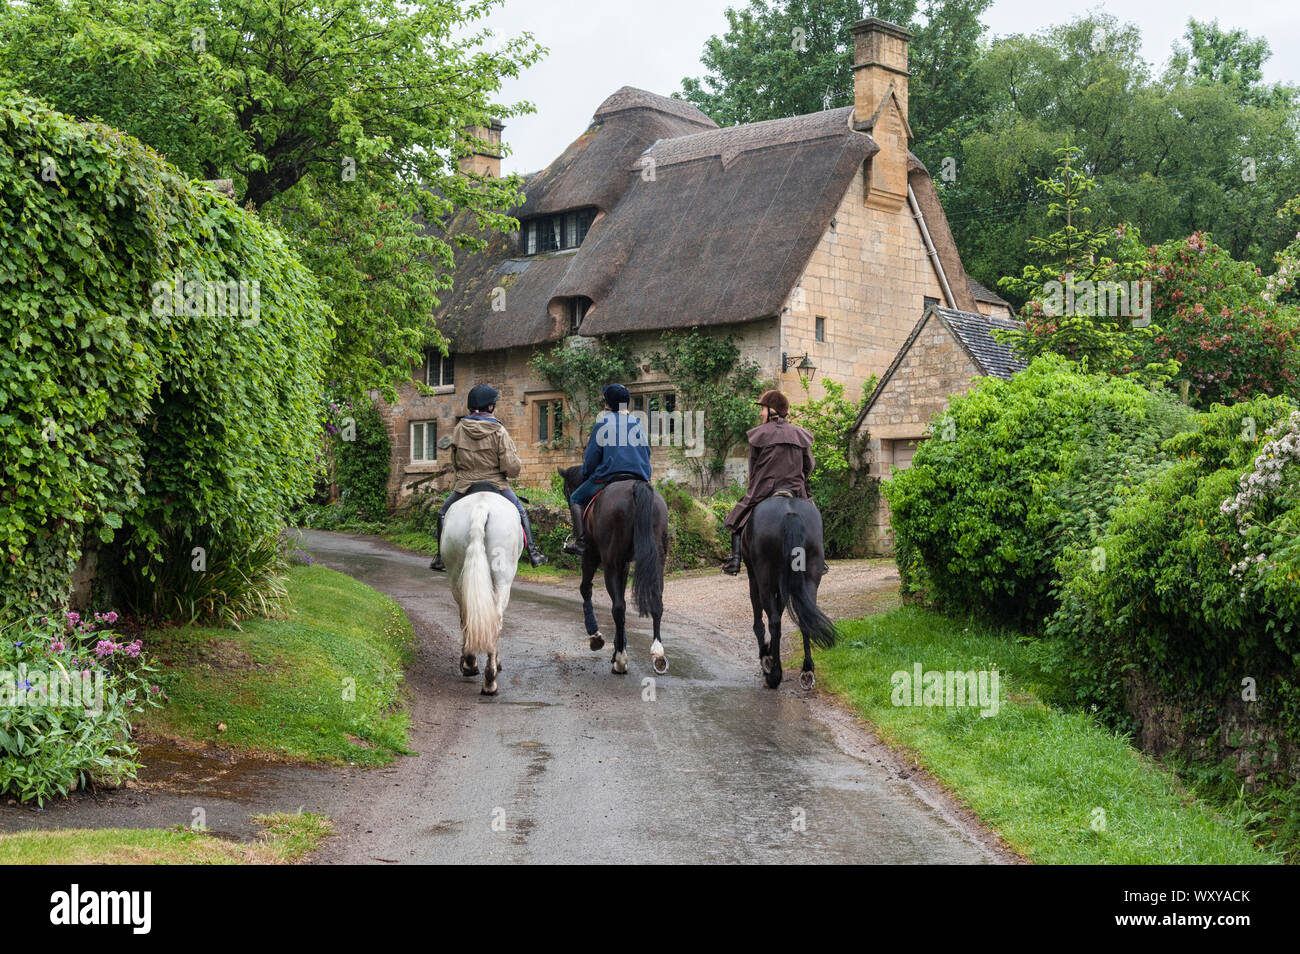 STANTON, ENGLAND - MAY, 26 2018:  Unidentifed people and horses near cottages in the village of Stanton, Cotswolds district of Gloucestershire. Stock Photo